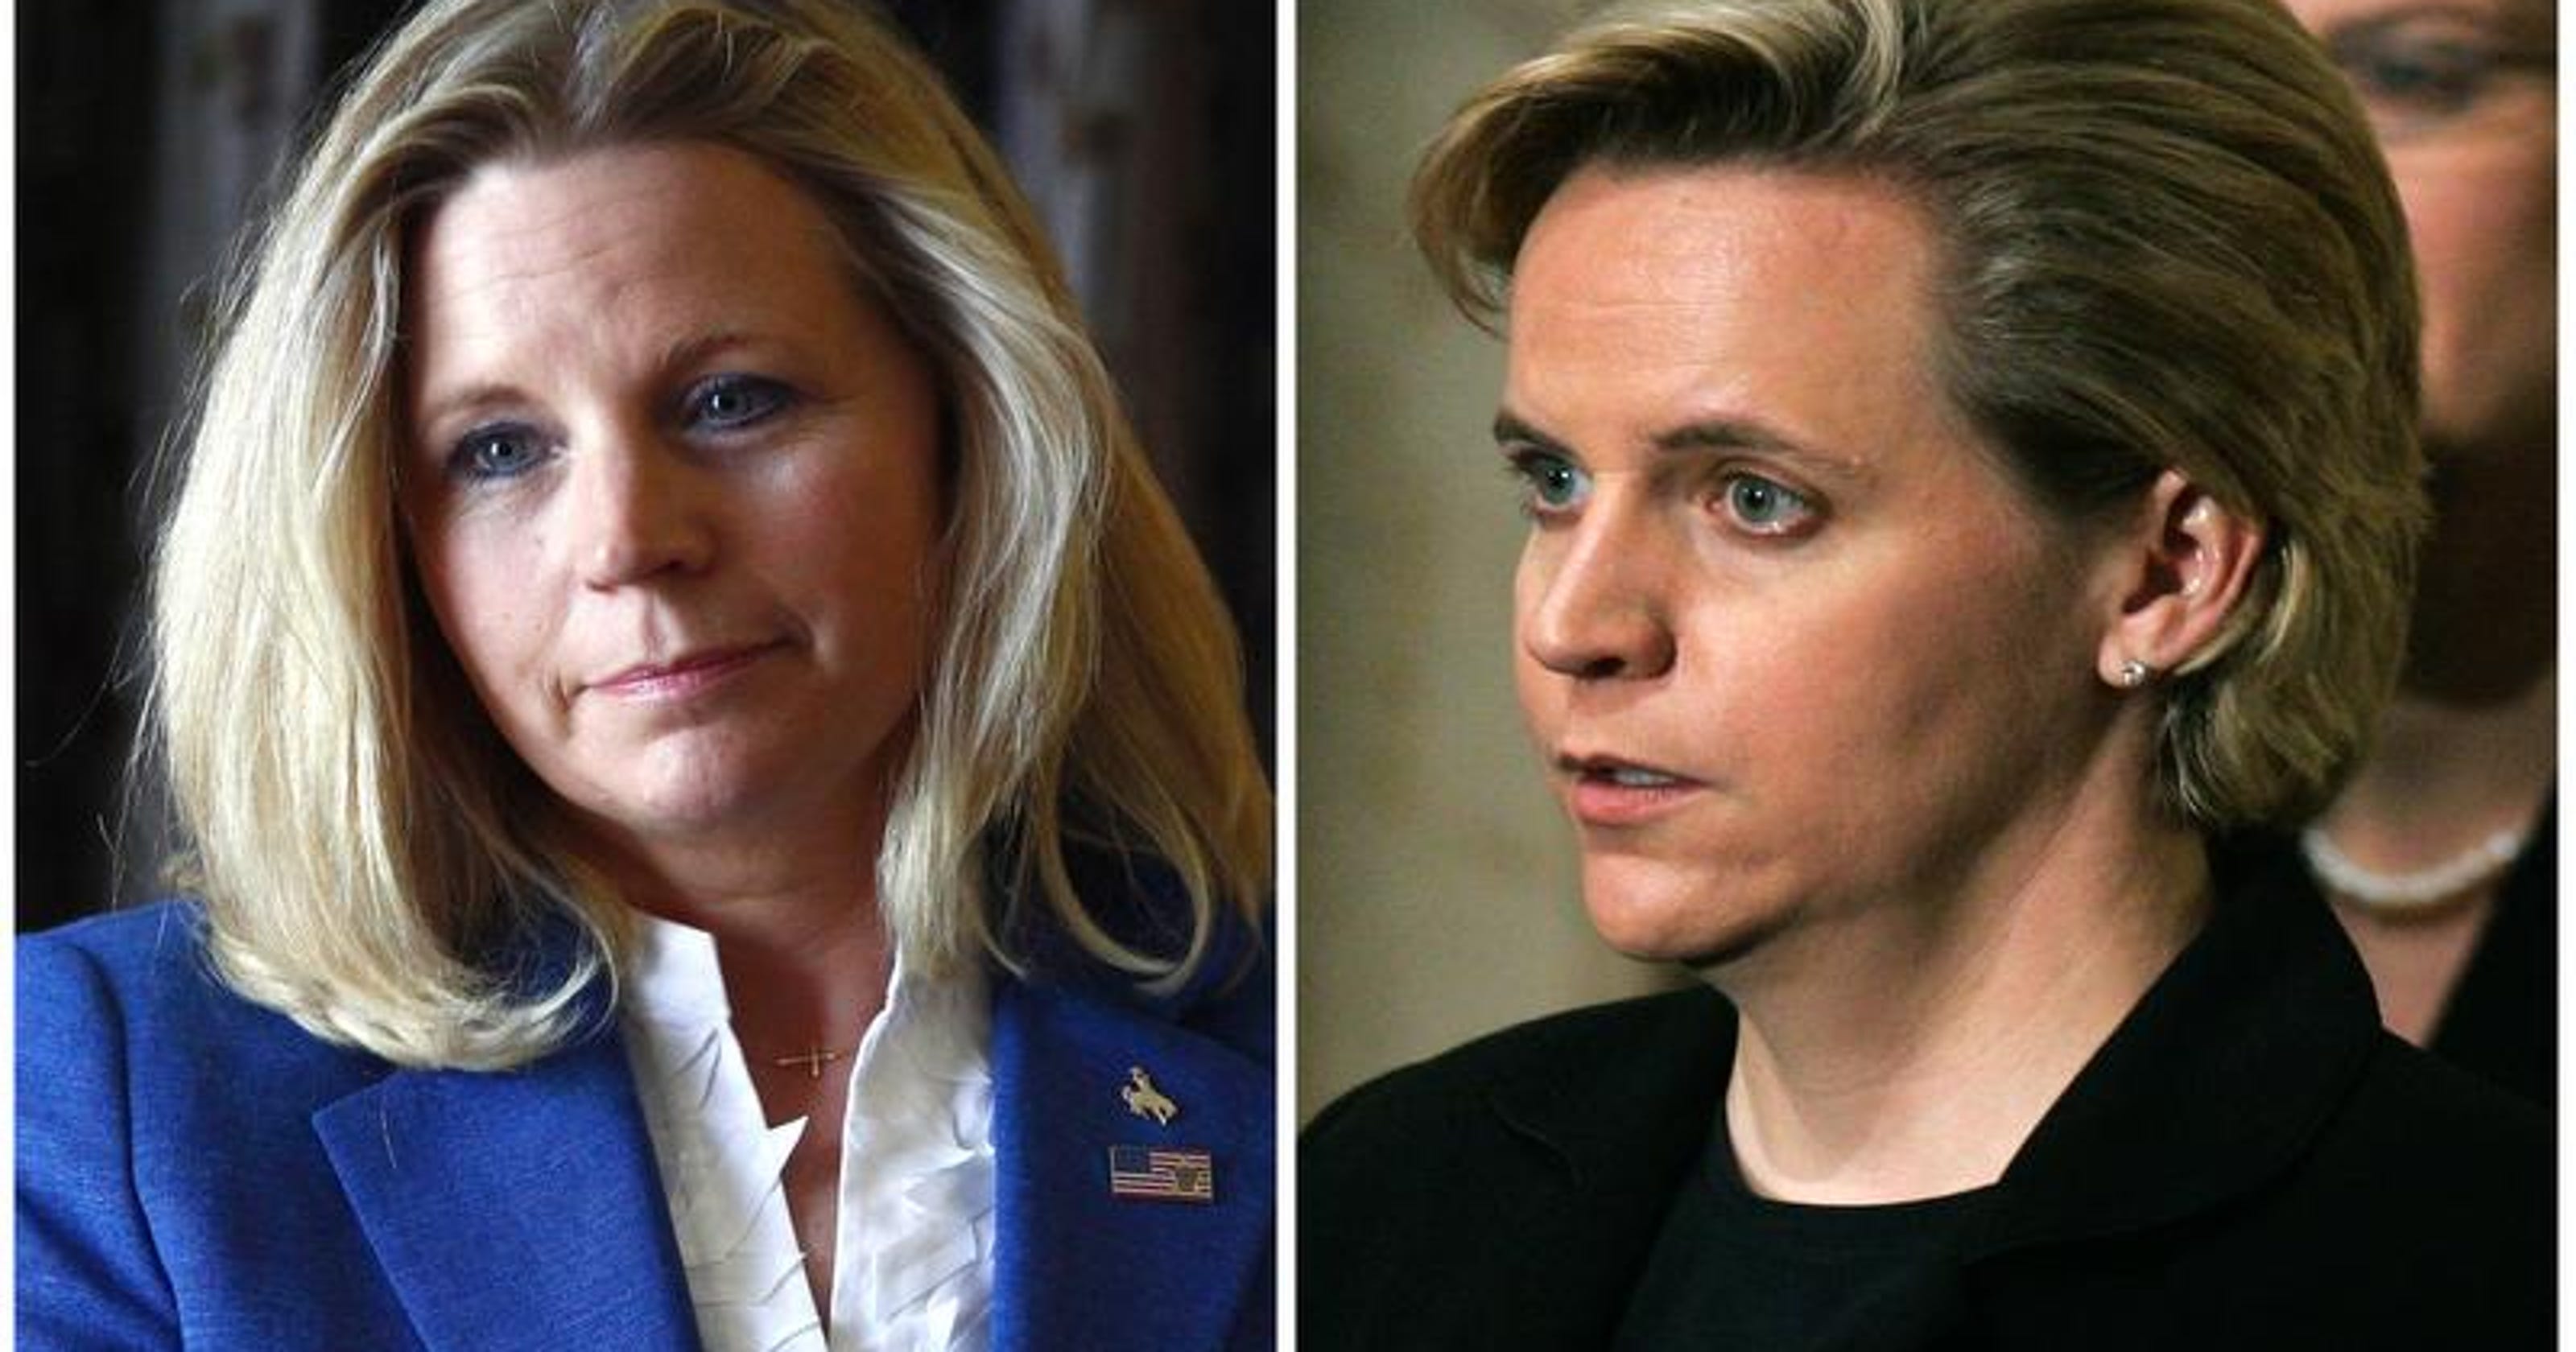 Mary Cheney to lead fundraiser against Indiana gay marriage ban